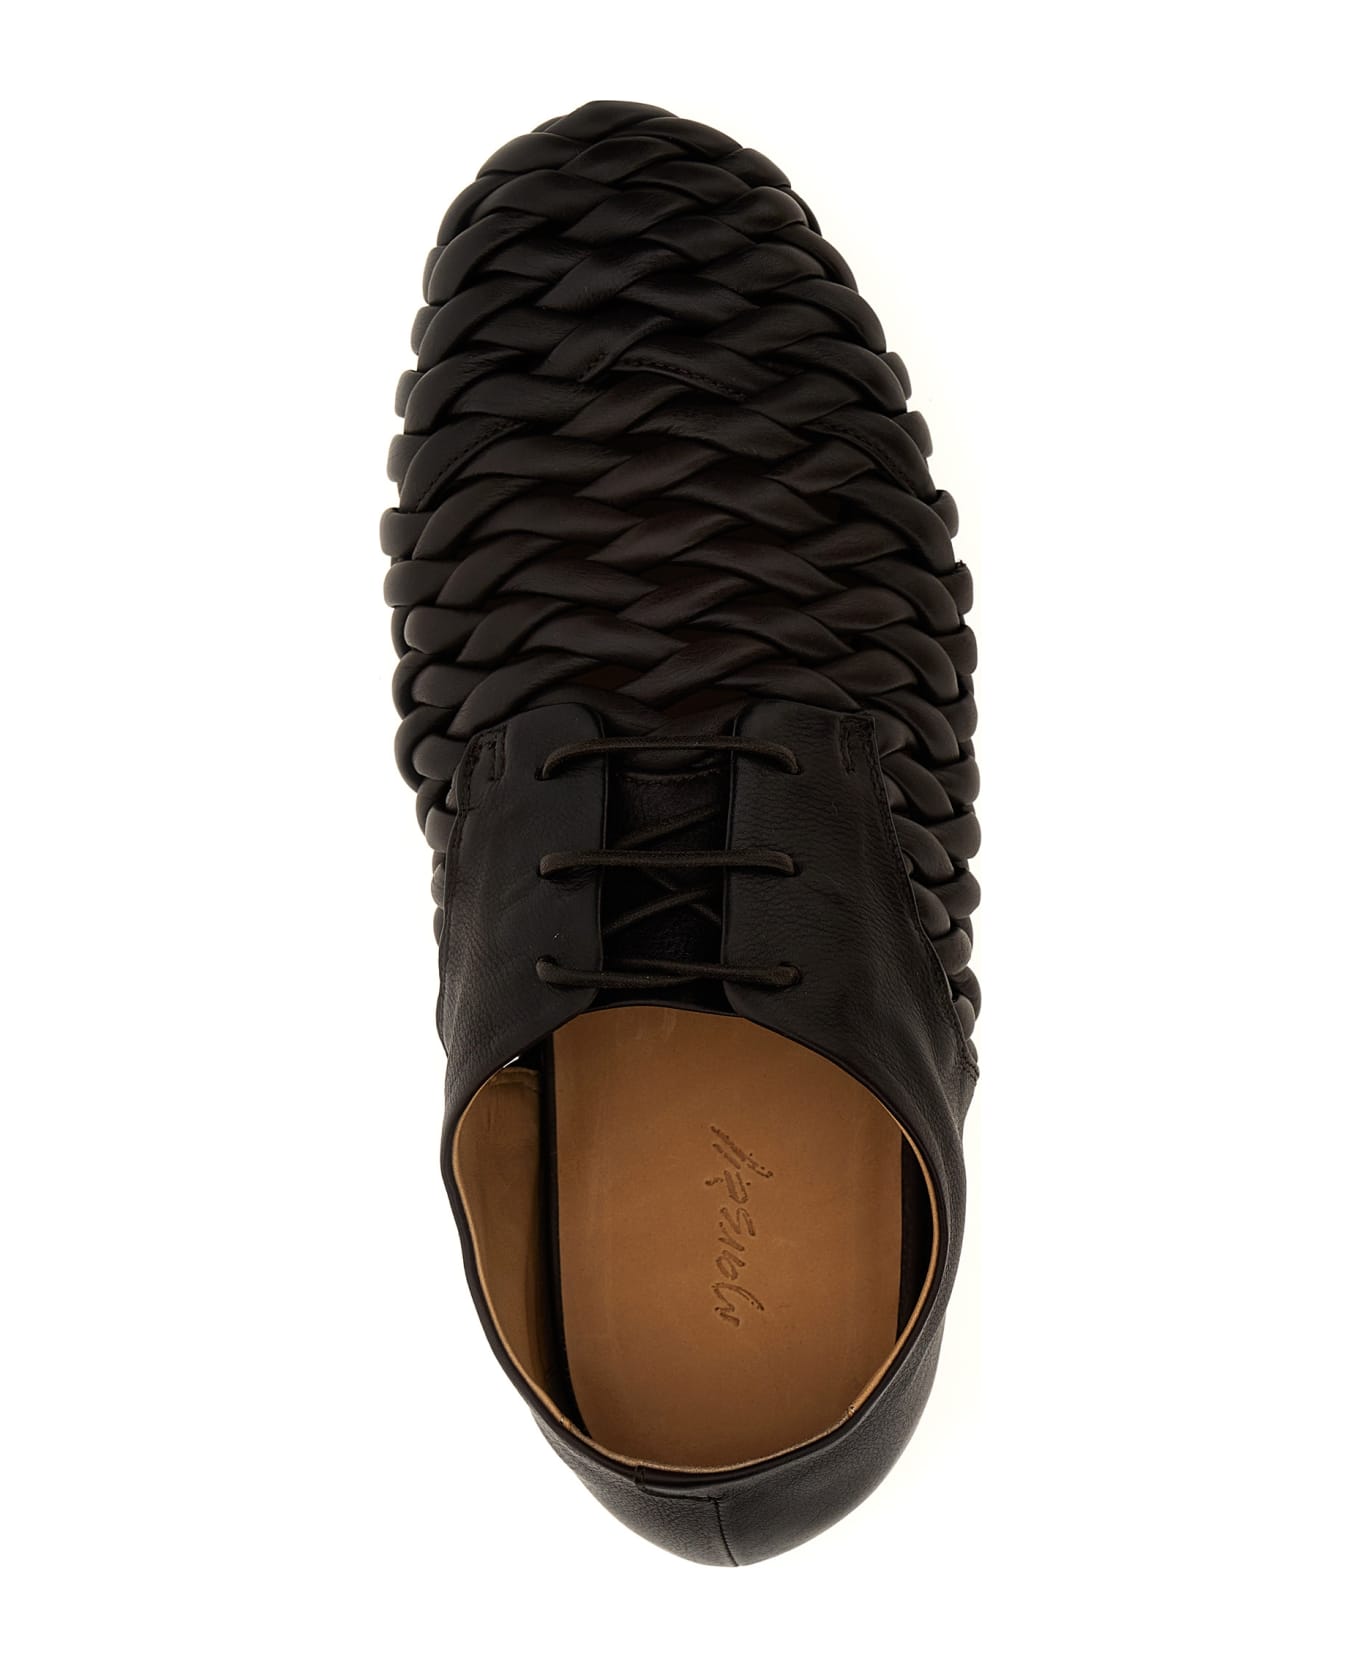 Marsell 'steccoblocco' Lace-up Shoes - Brown